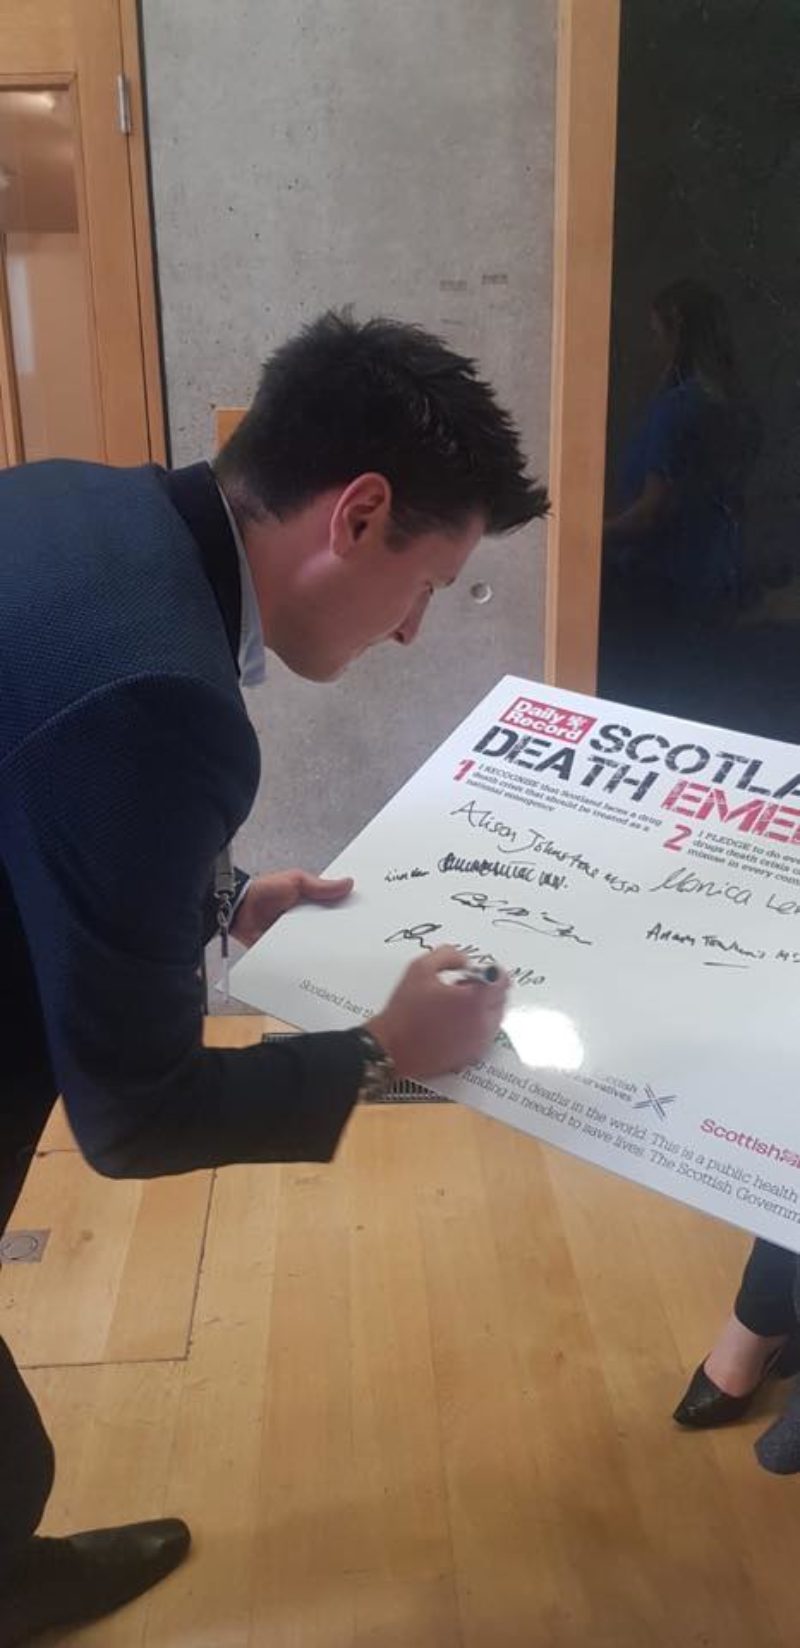 Signing the Daily Record